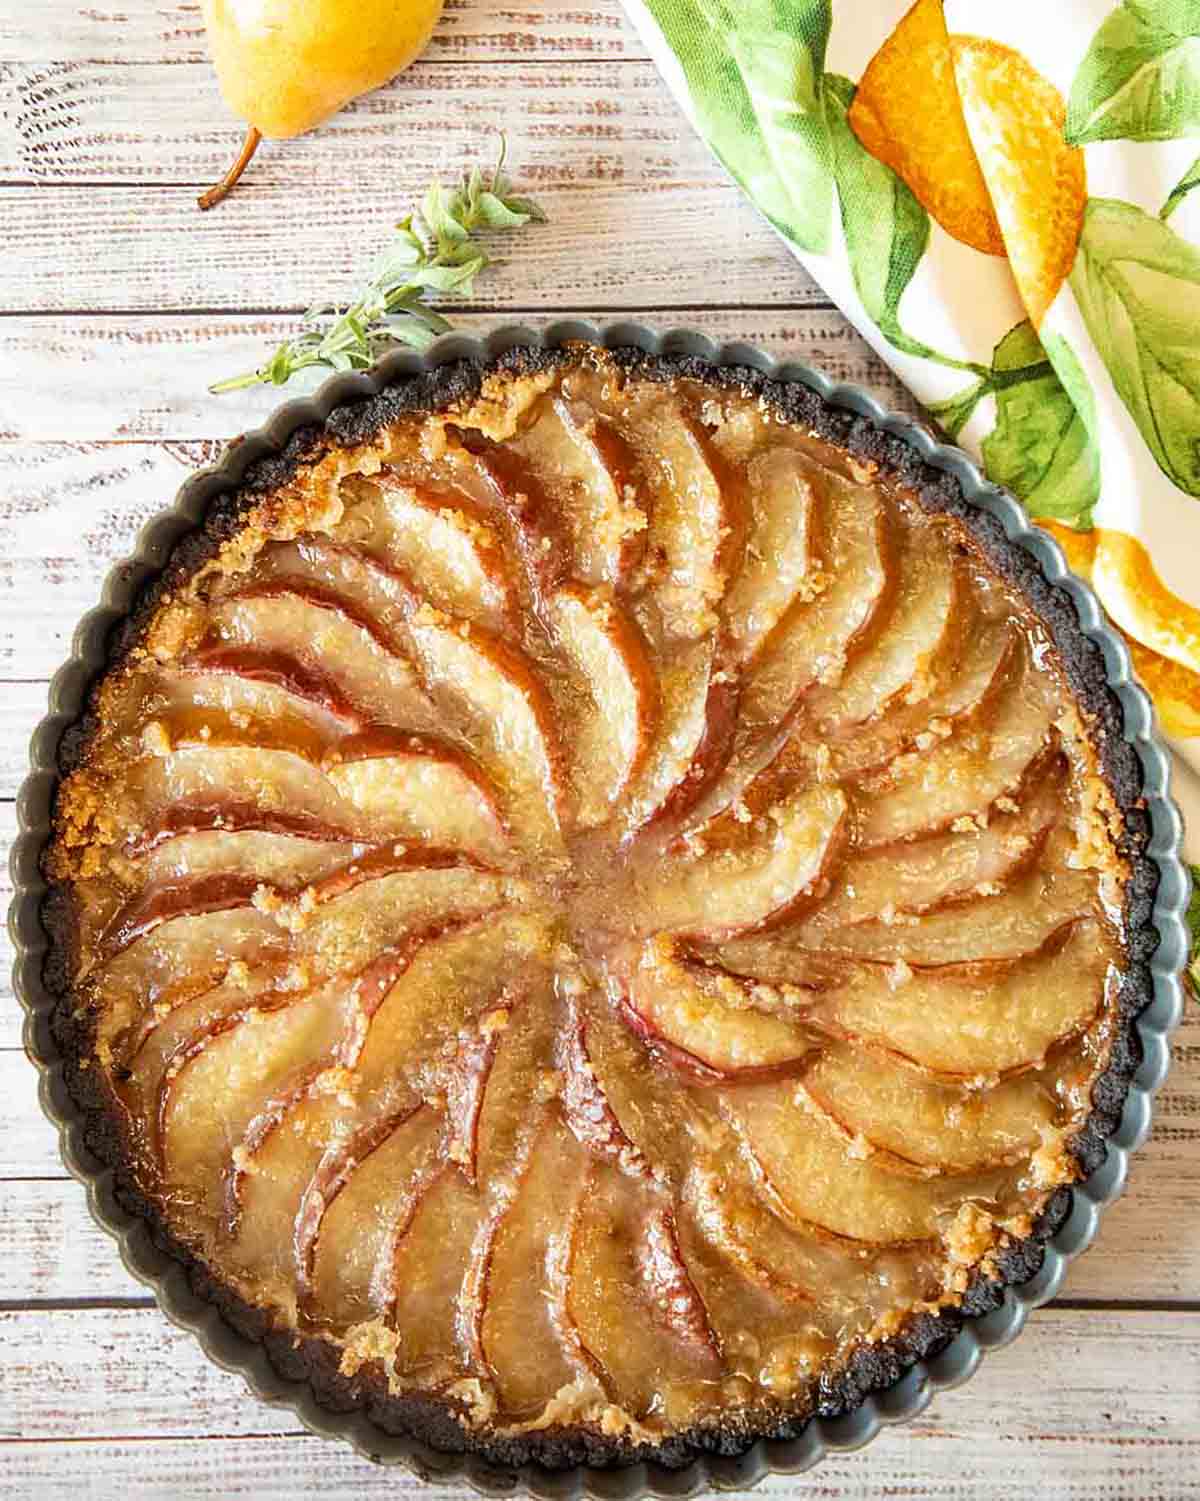 vegan pear tart from above with the pear slices neatly arranged